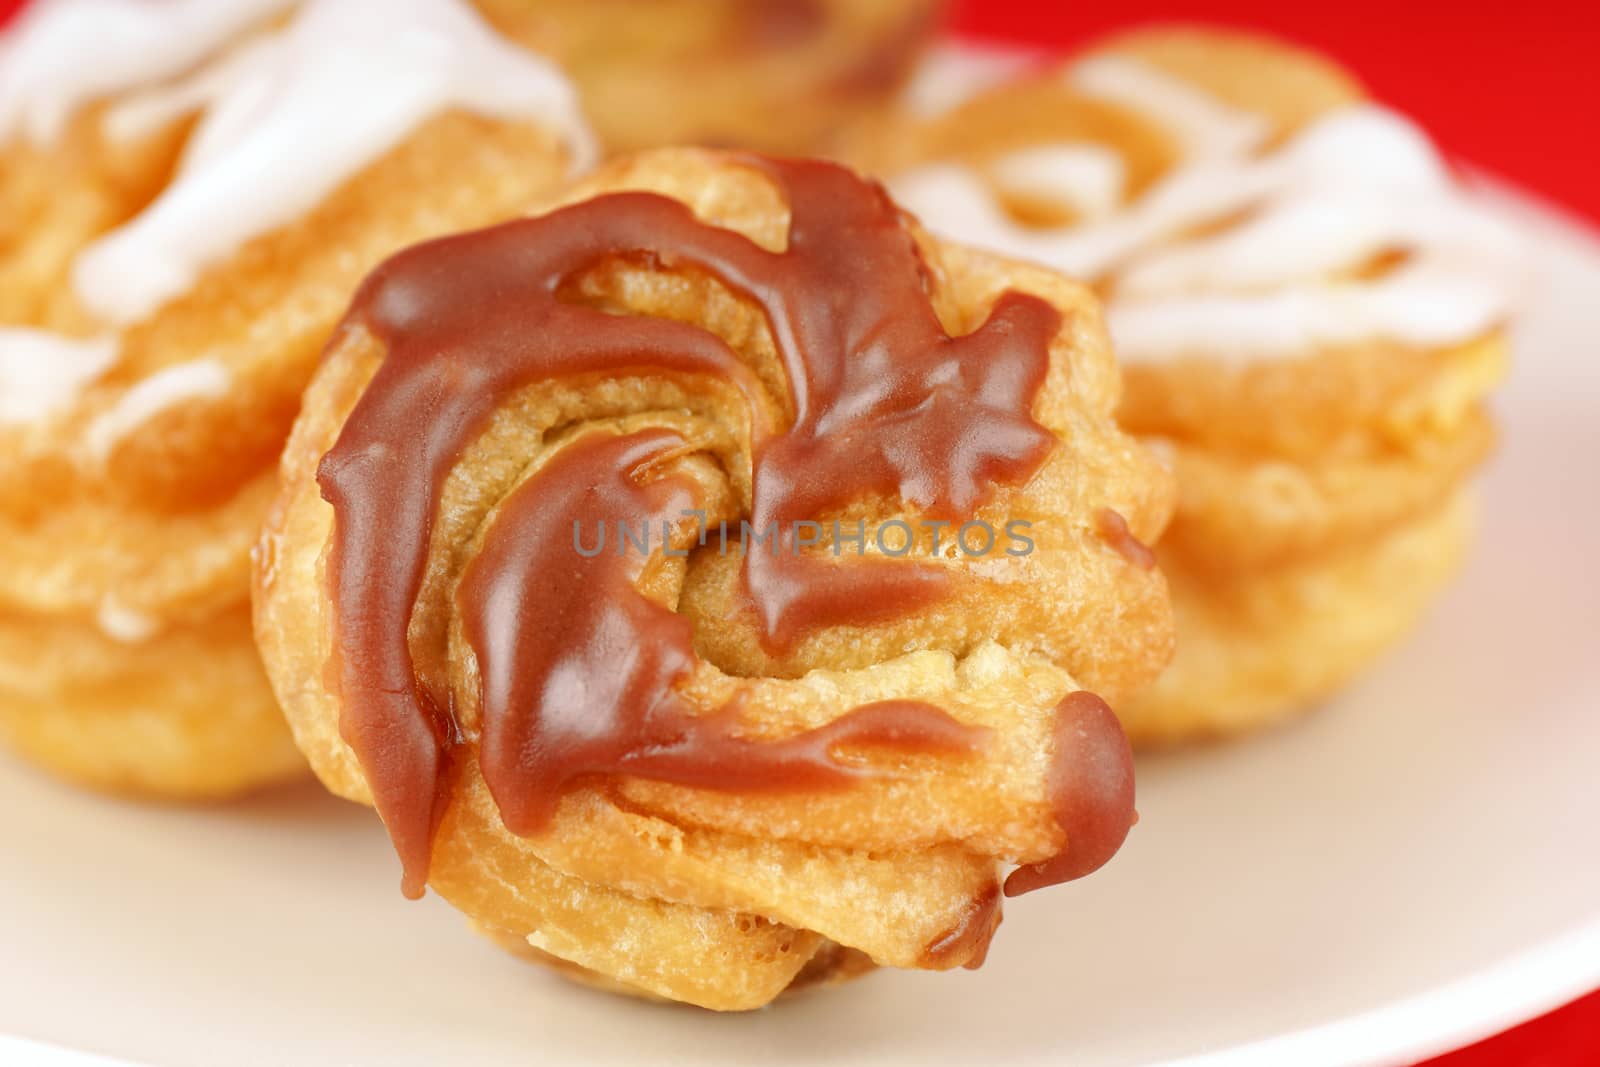 Zeppole di San Giuseppe or St. Joseph's Day Cream Puffs, are south italian deep fried cakes, filled with custard and frosted. Isolated on red.